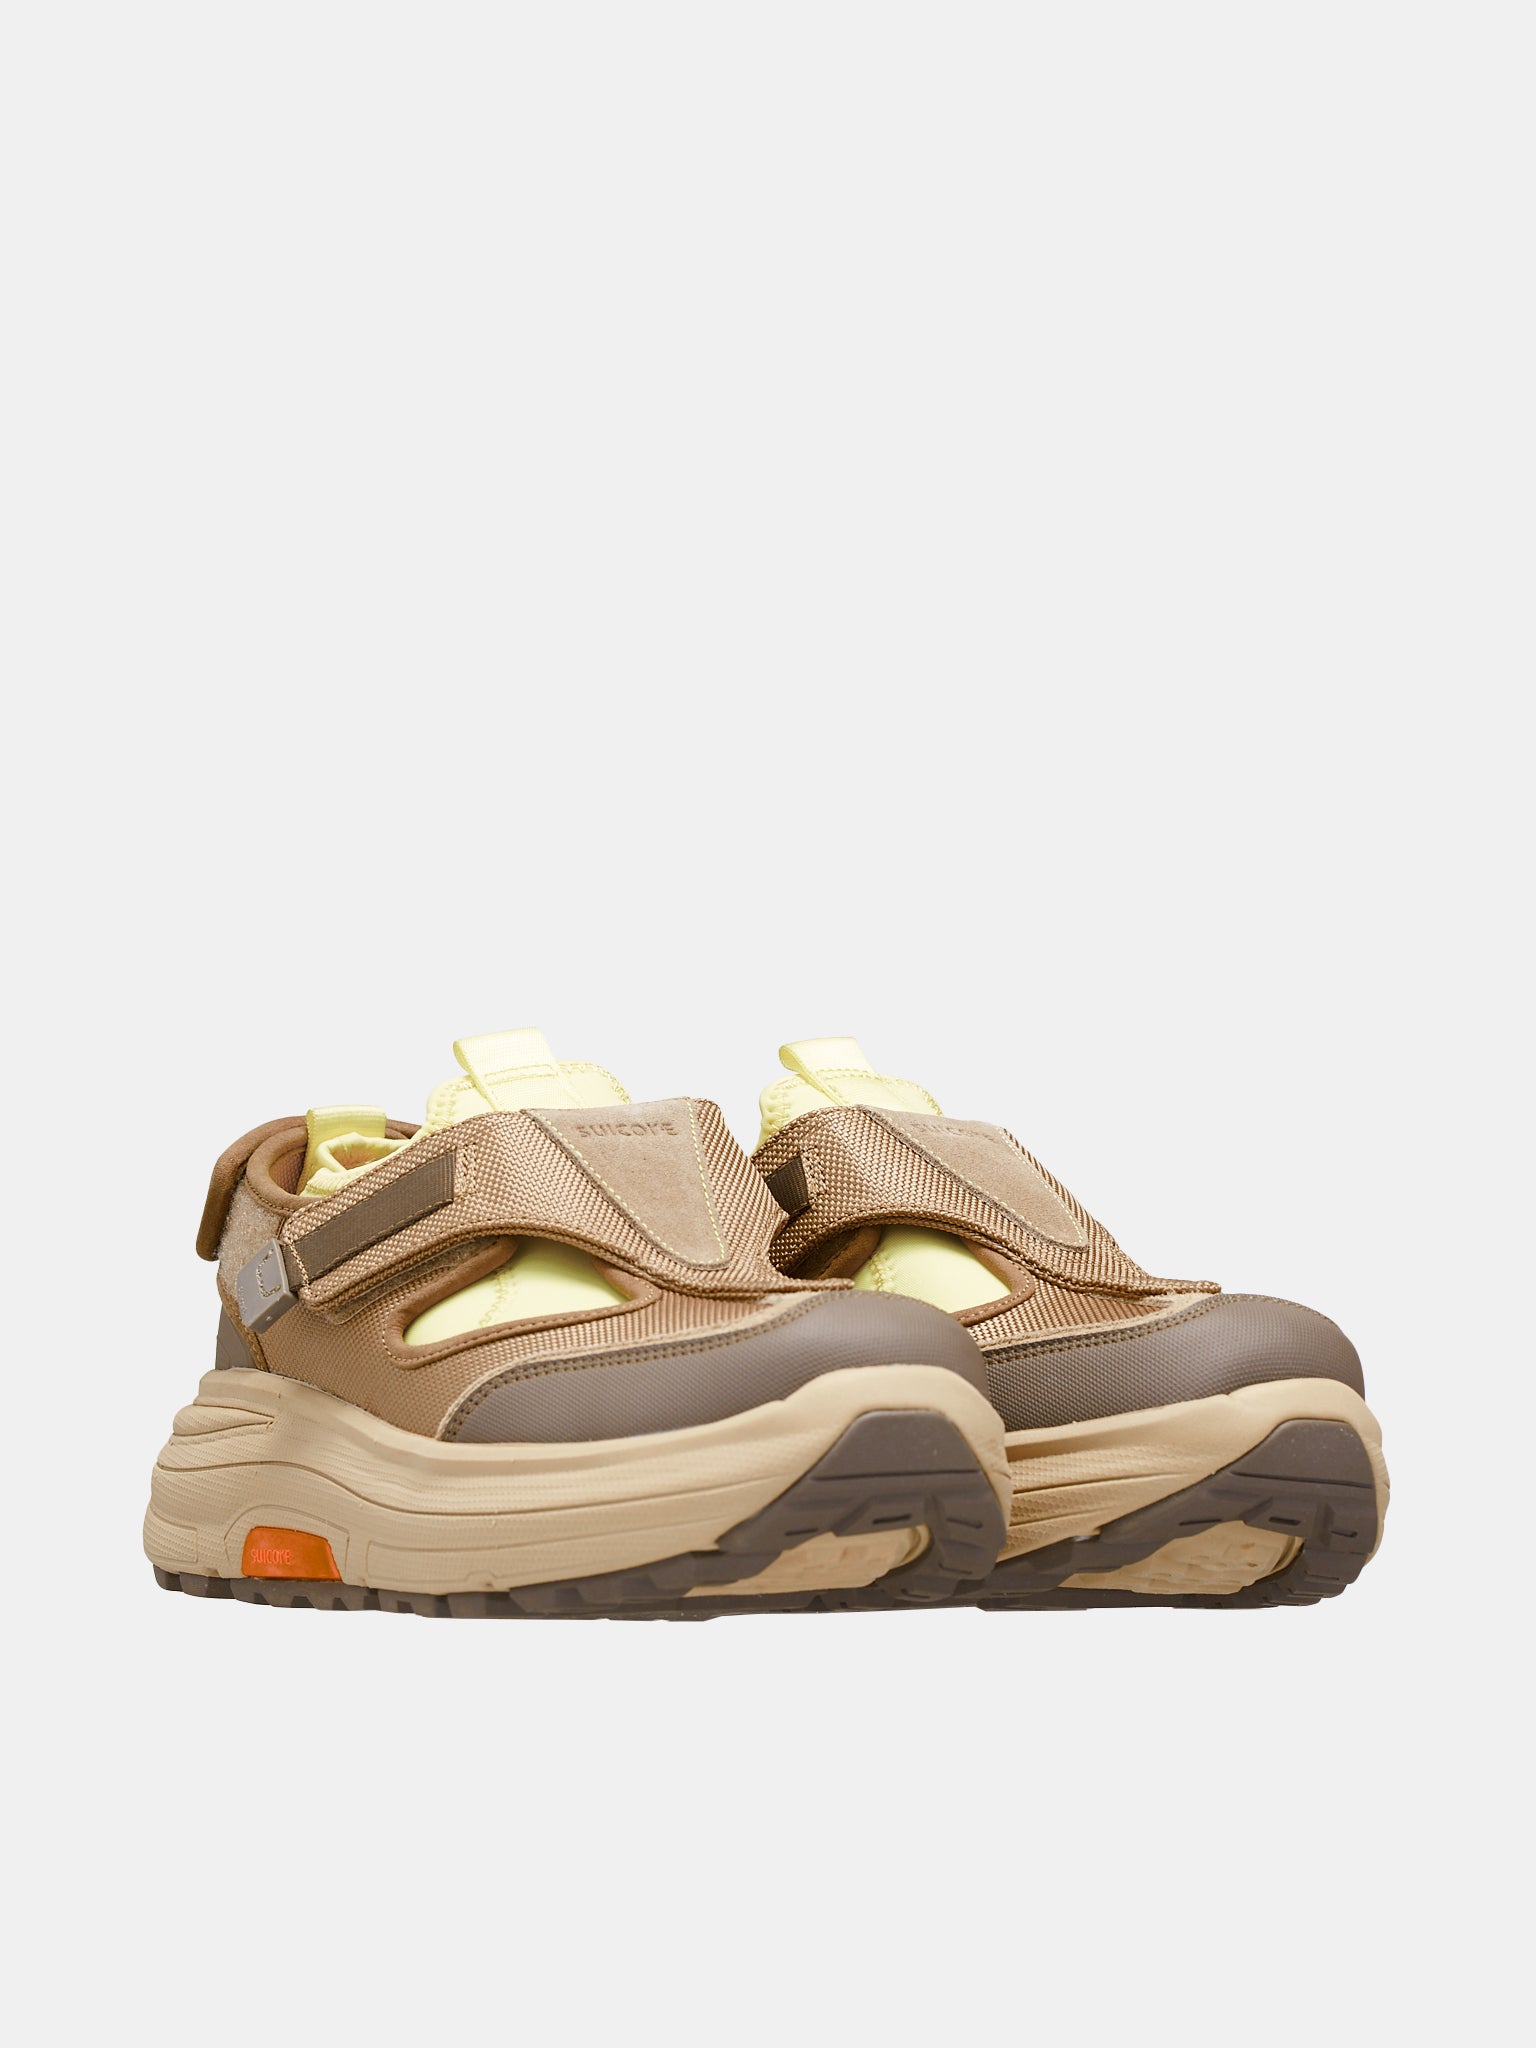 Tred Sneakers (OG-349-BEIGE-YELLOW)